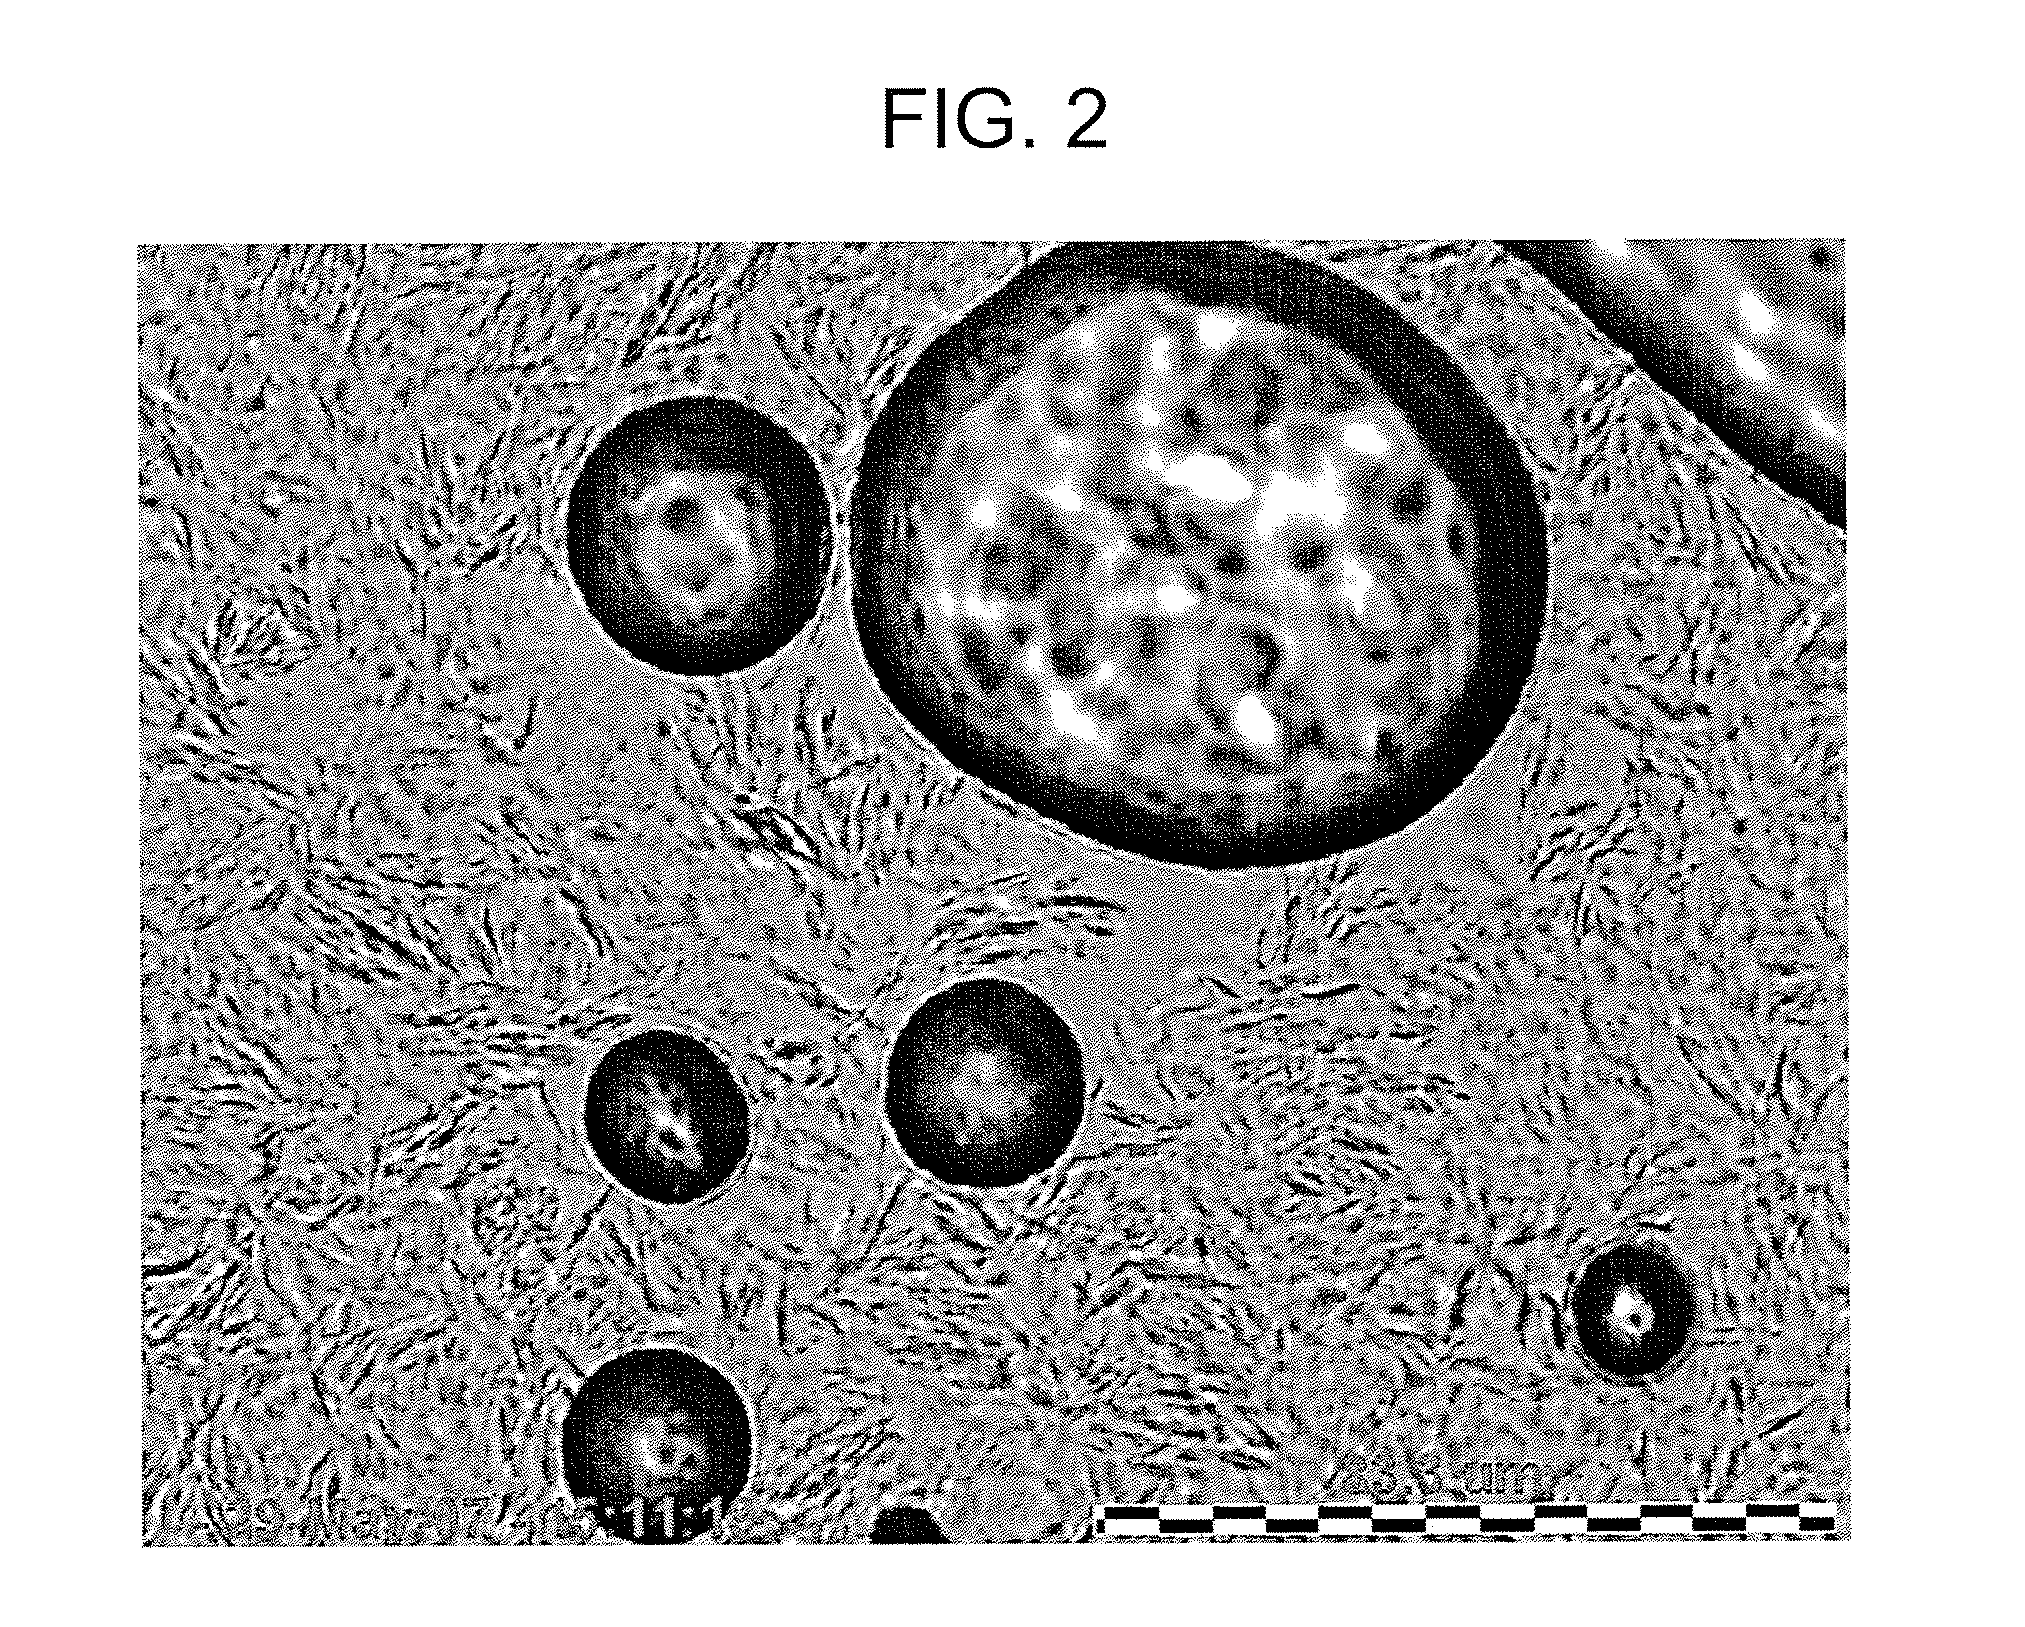 Polypropylene glycol foamable vehicle and pharmaceutical compositions thereof